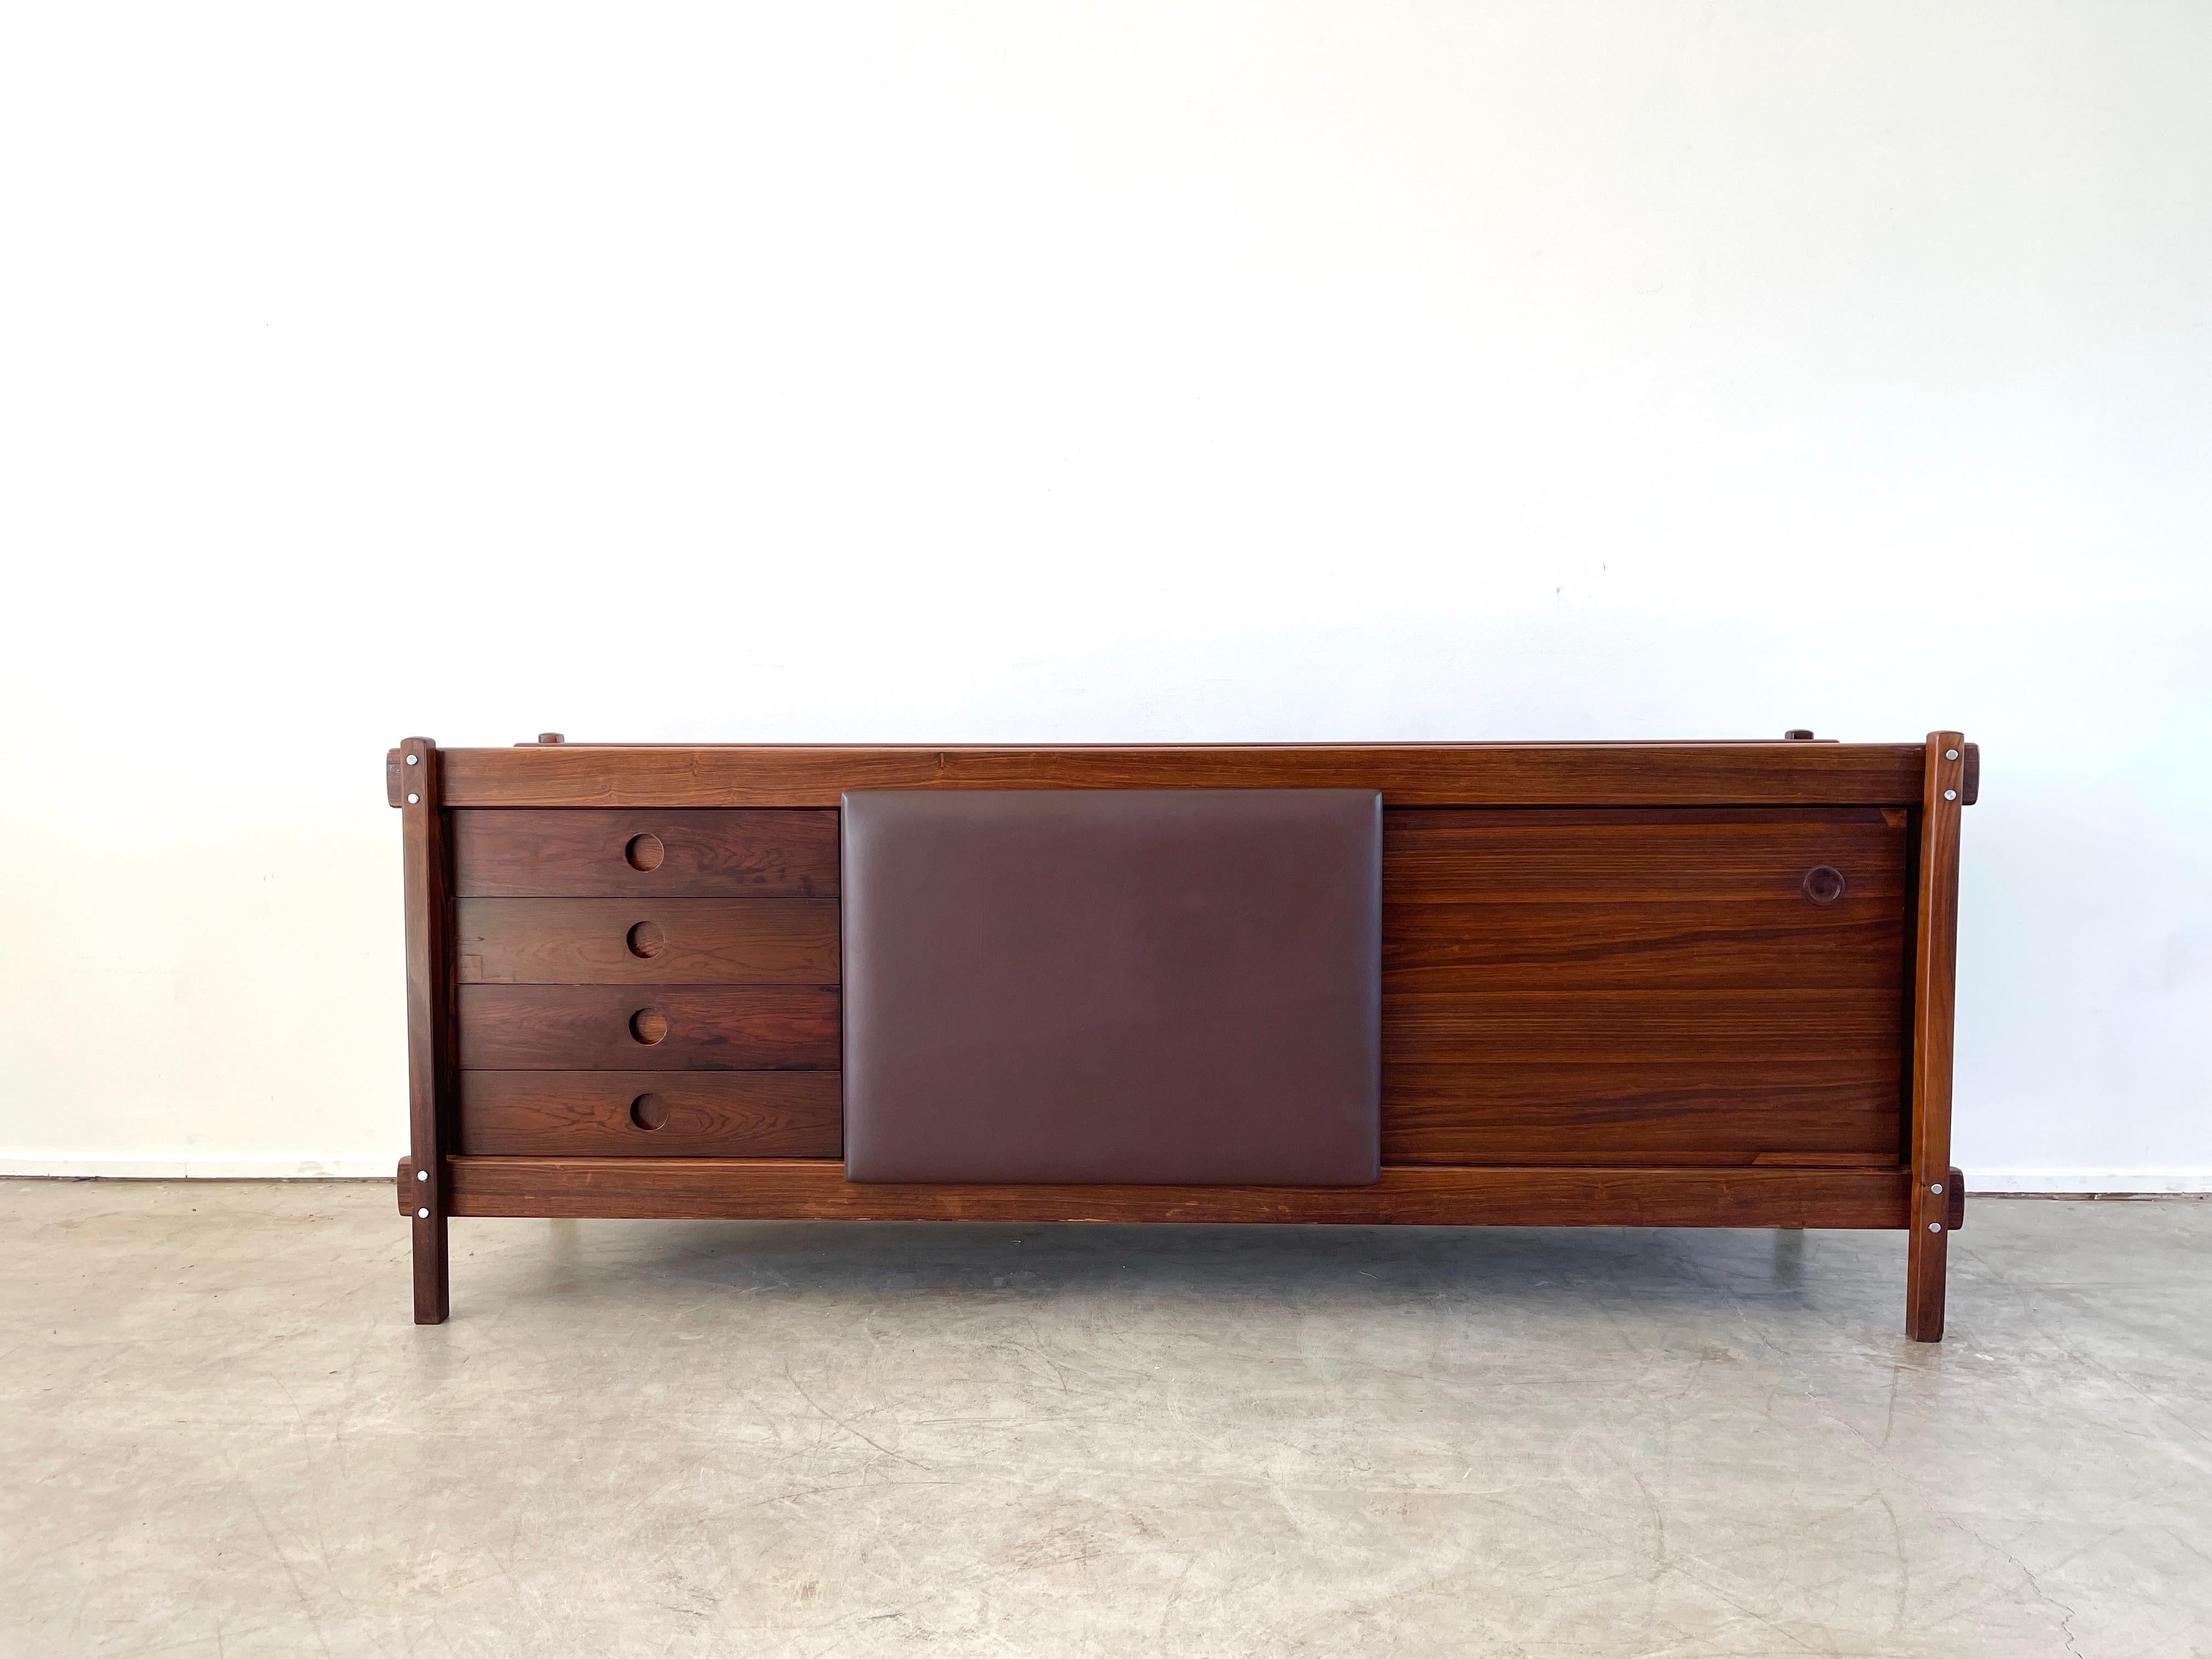 Rosewood and leather sideboard by Sergio Rodrigues, 1960's
Gorgeous rosewood with sliding leather door and 4 drawers. 
Wonderful piece.
 